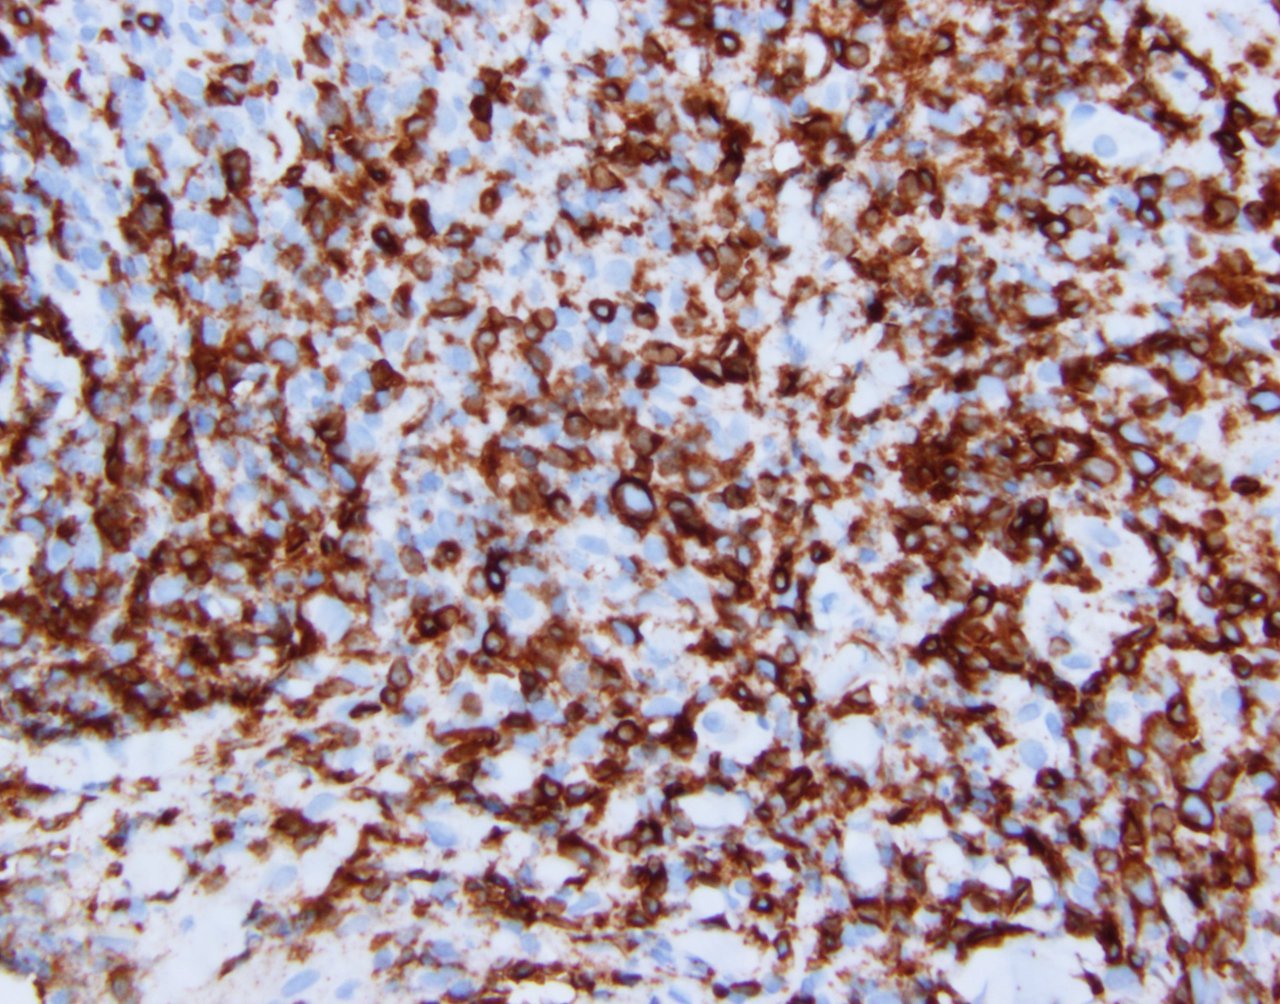 Neoplastic T cells showing strong CD3 expression